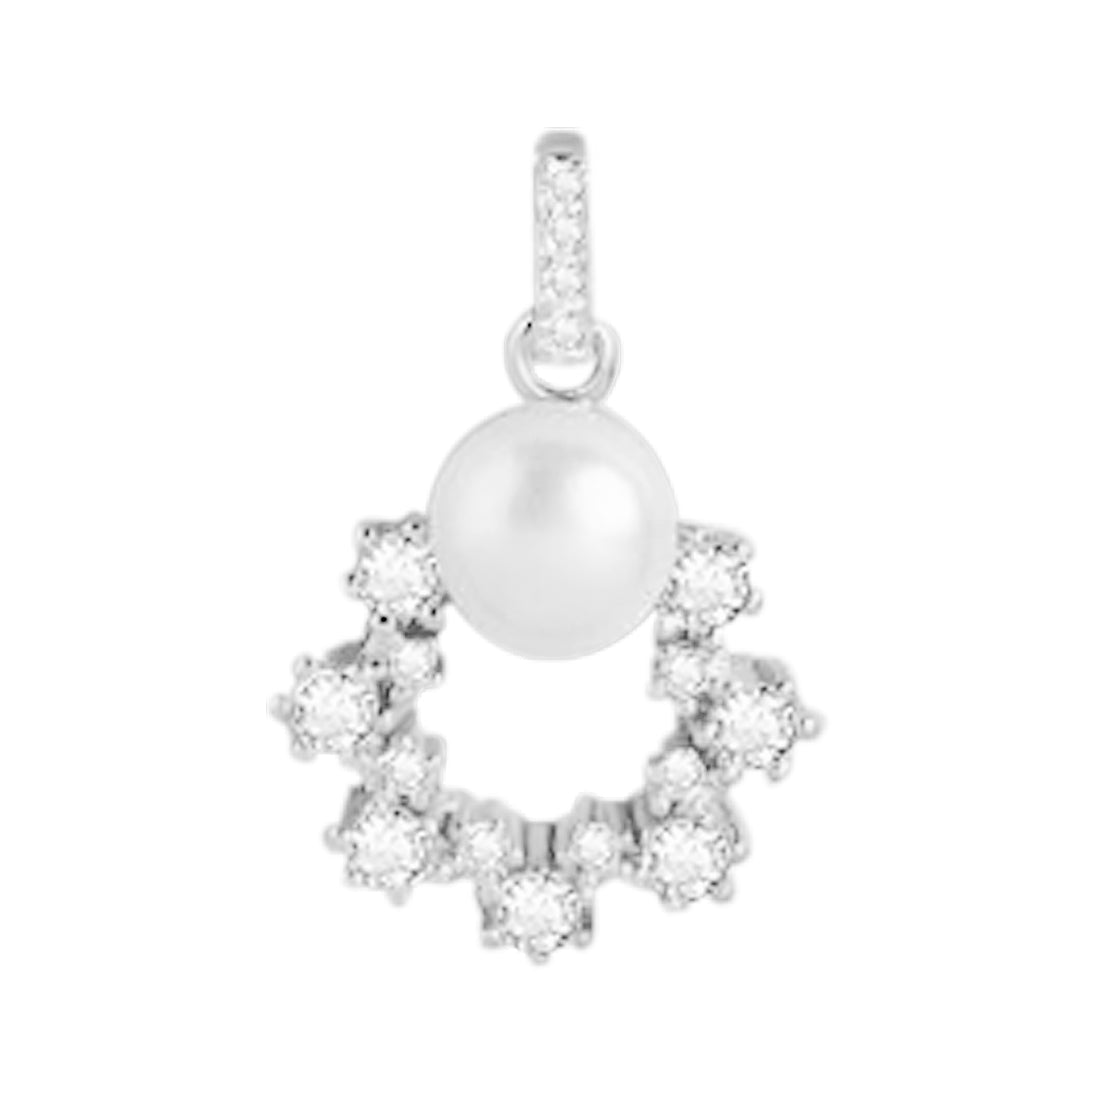 Floral Pearl Serenade Rhodium-Plated 925 Sterling Silver Pendant with Chain